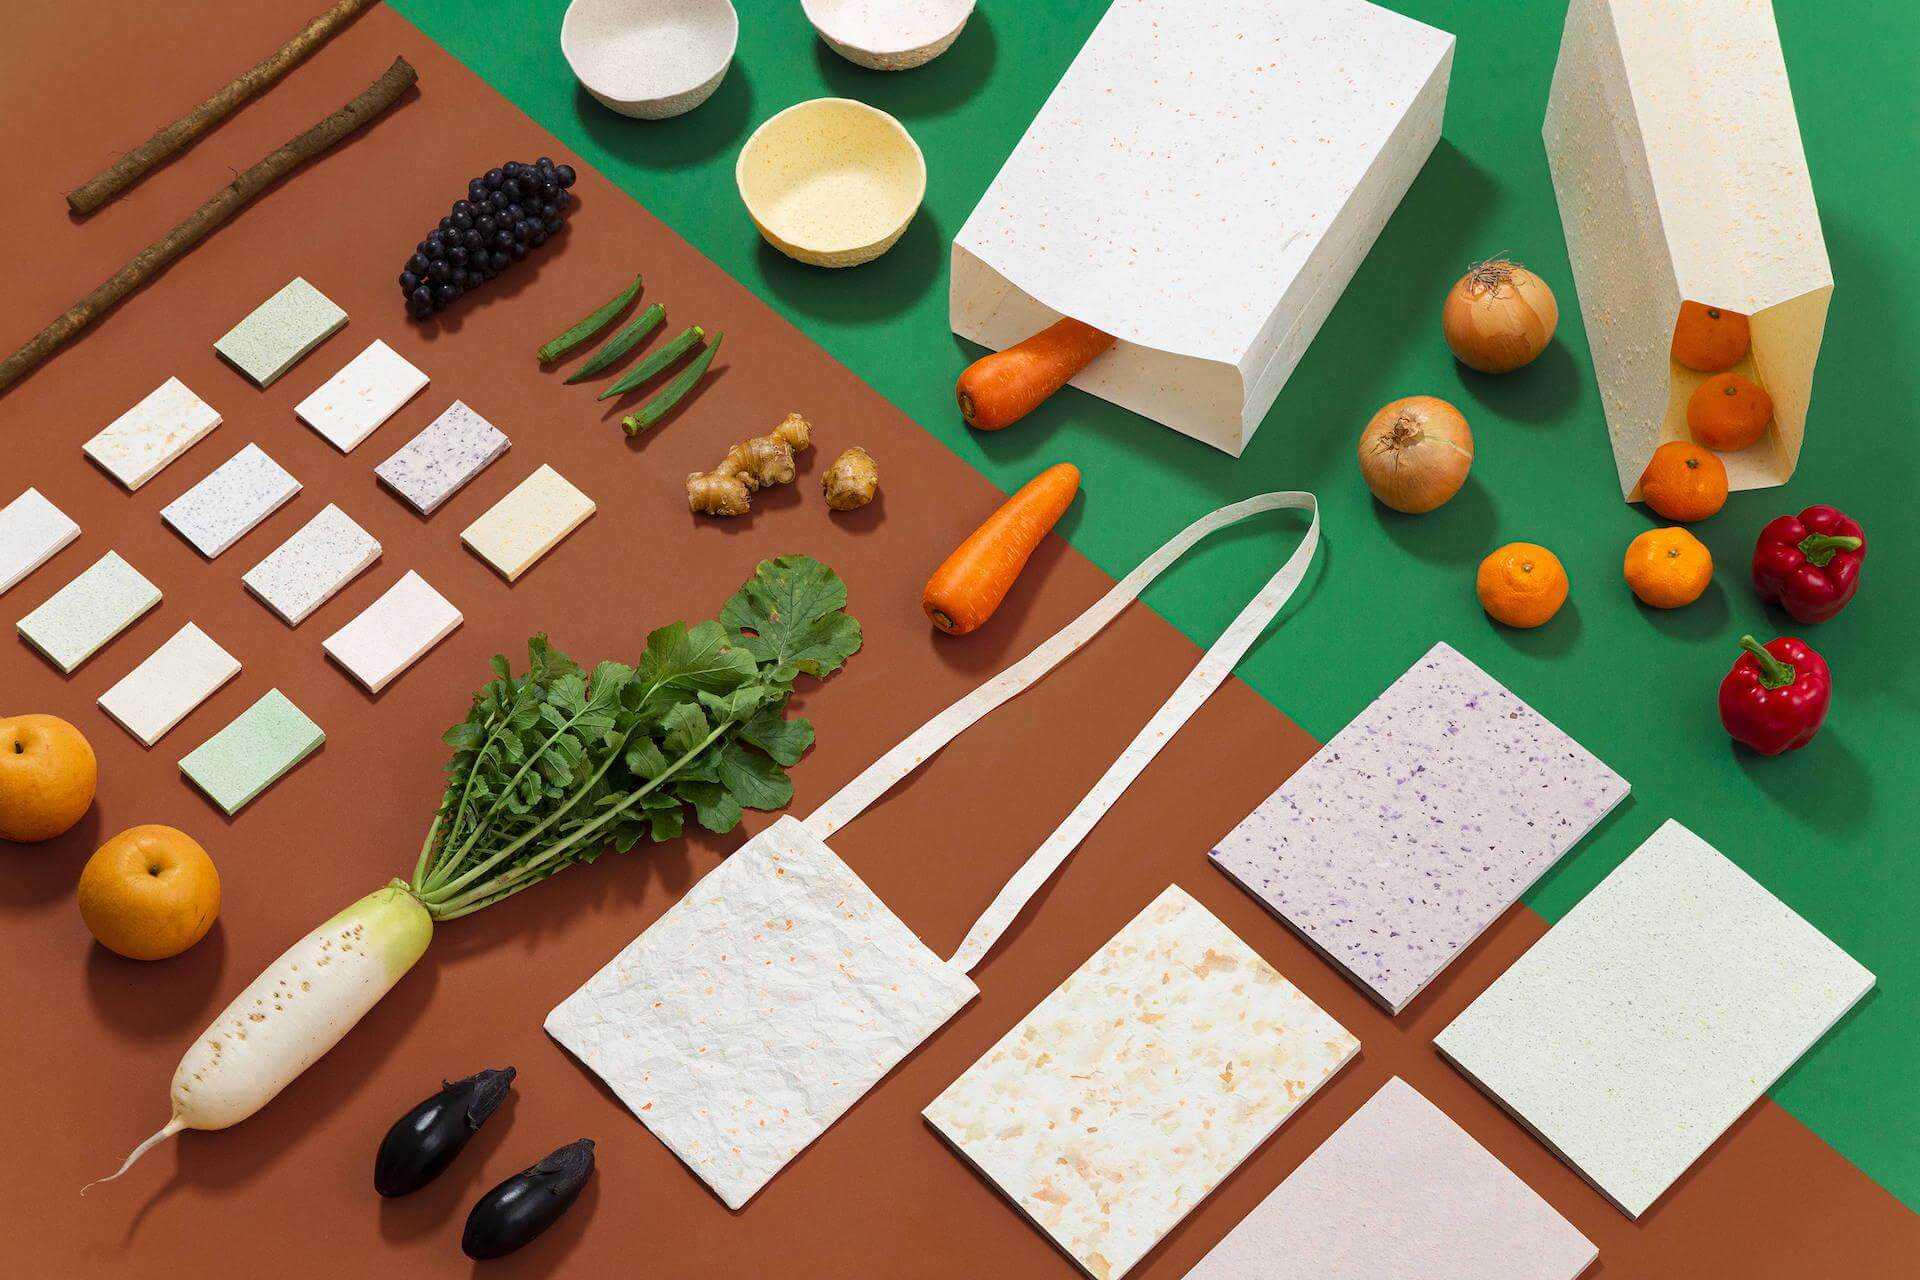 100% returnable "Food Paper" made from vegetables and fruits that return to the soil